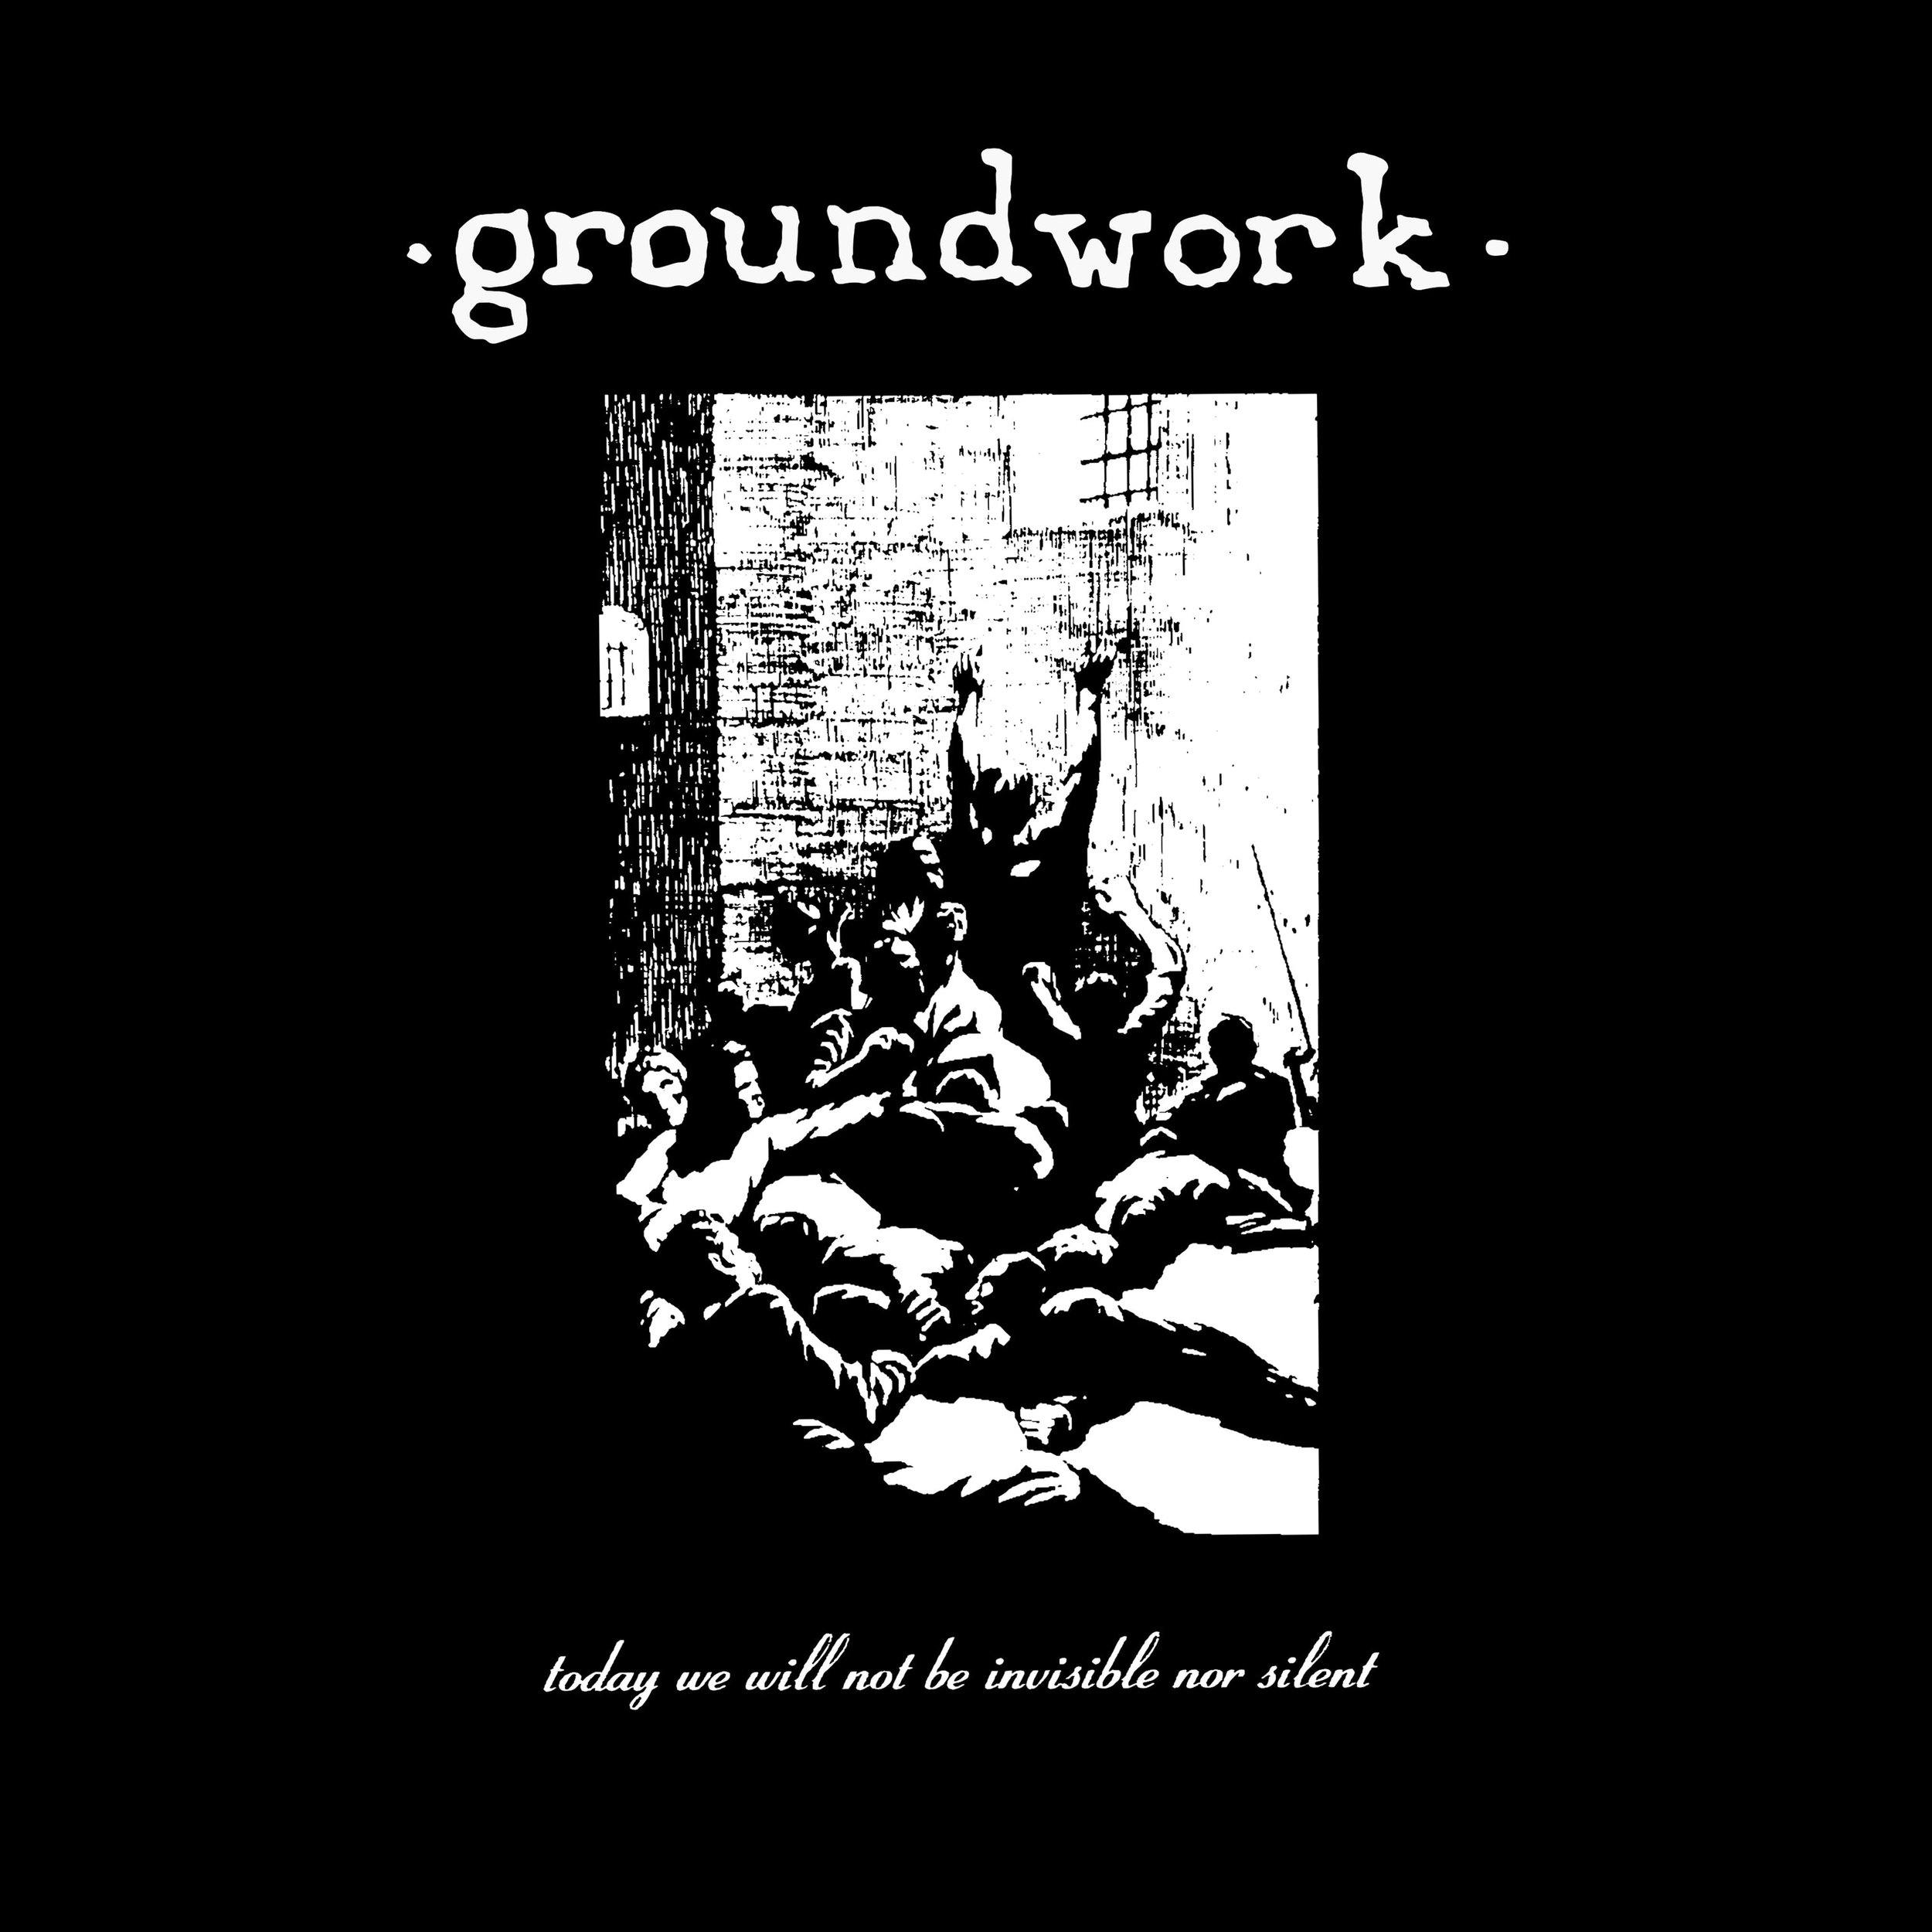 Groundwork - Today We Will - Cover.jpg